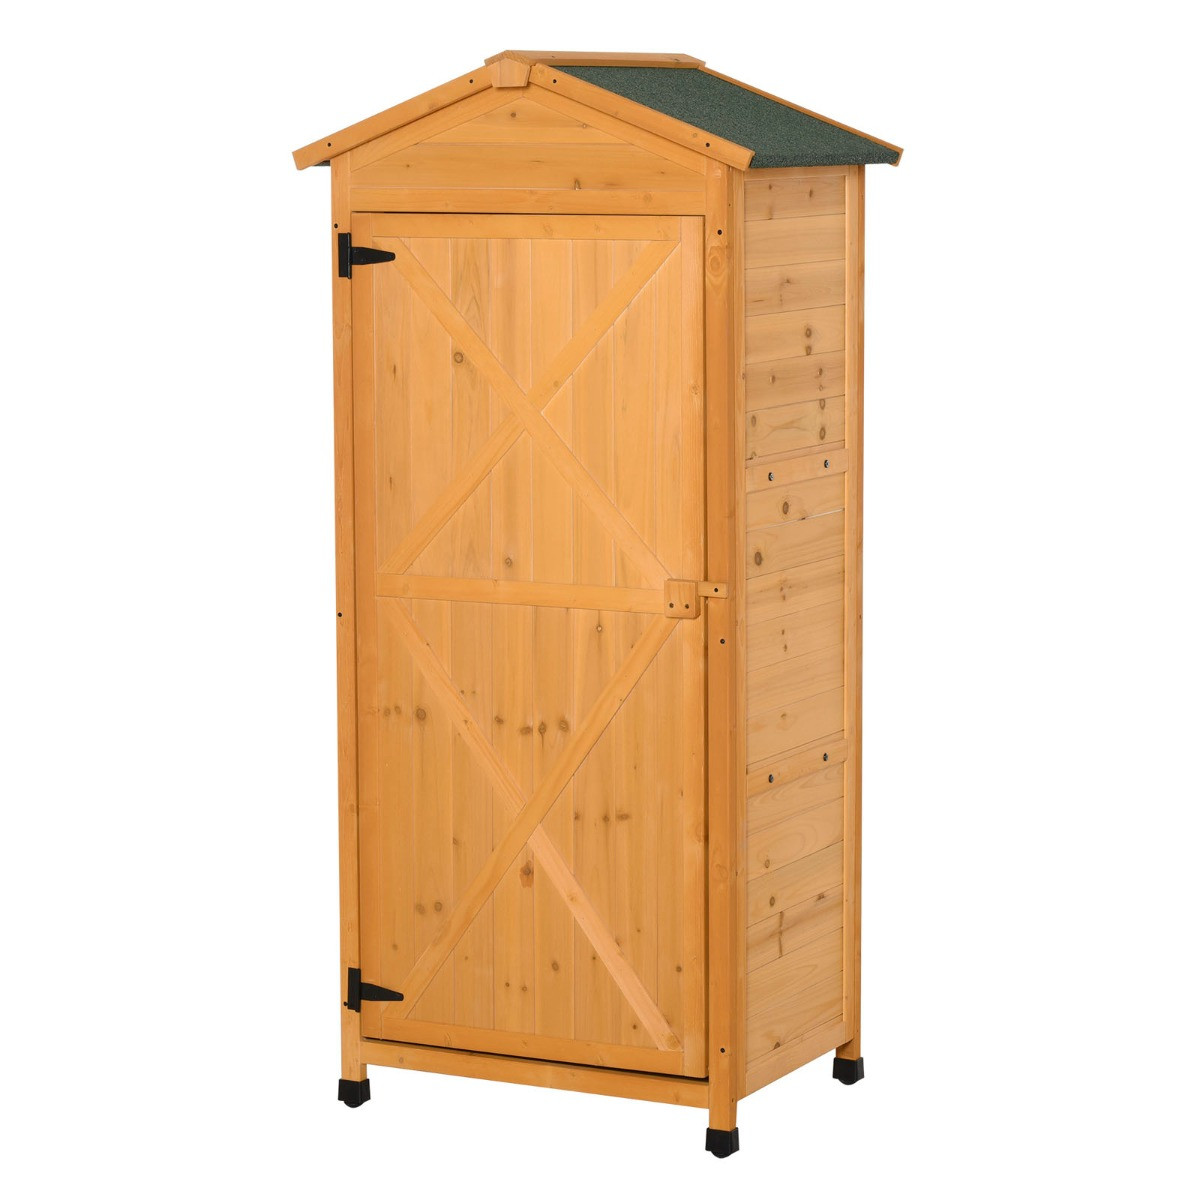 Outsunny Wooden Garden Storage Shed Cabinet, Natural Wood - Tall>